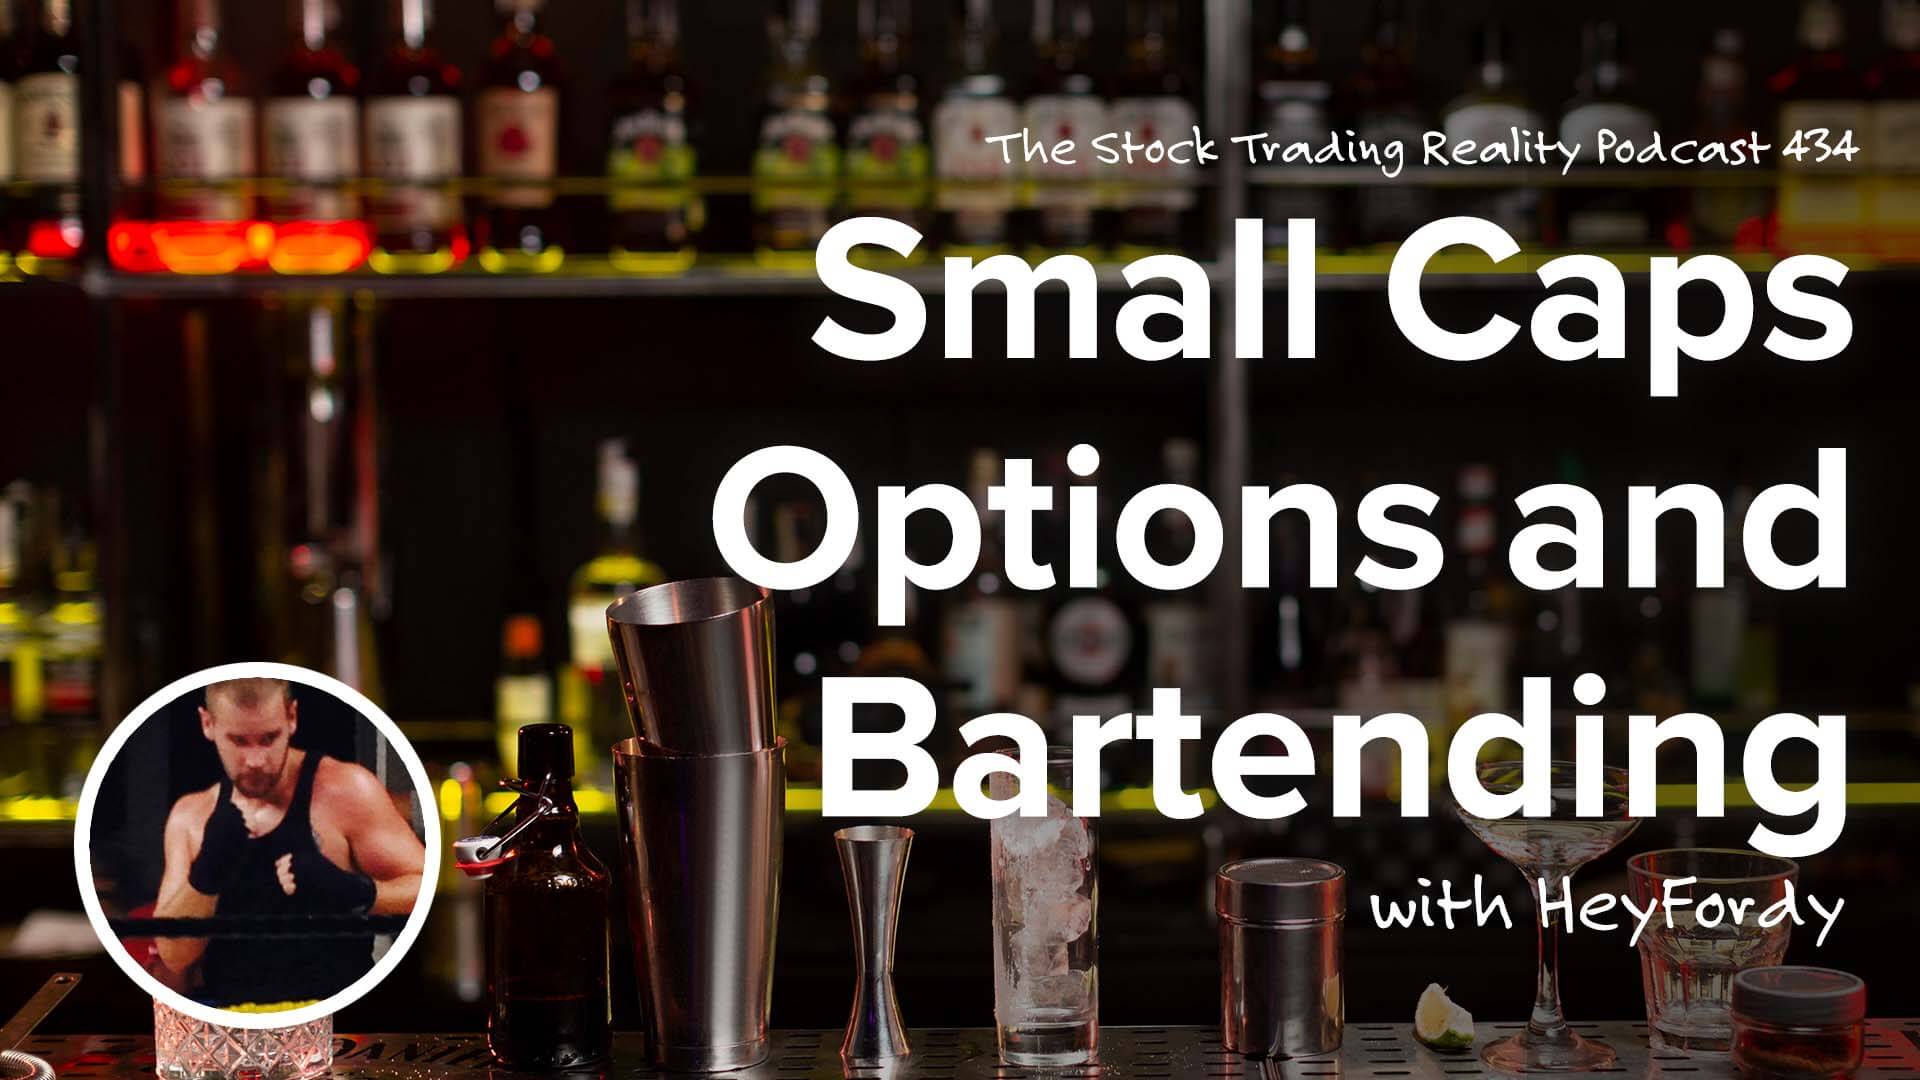 Small Caps, Options and Bartending with “HeyFordy”! | STR 434